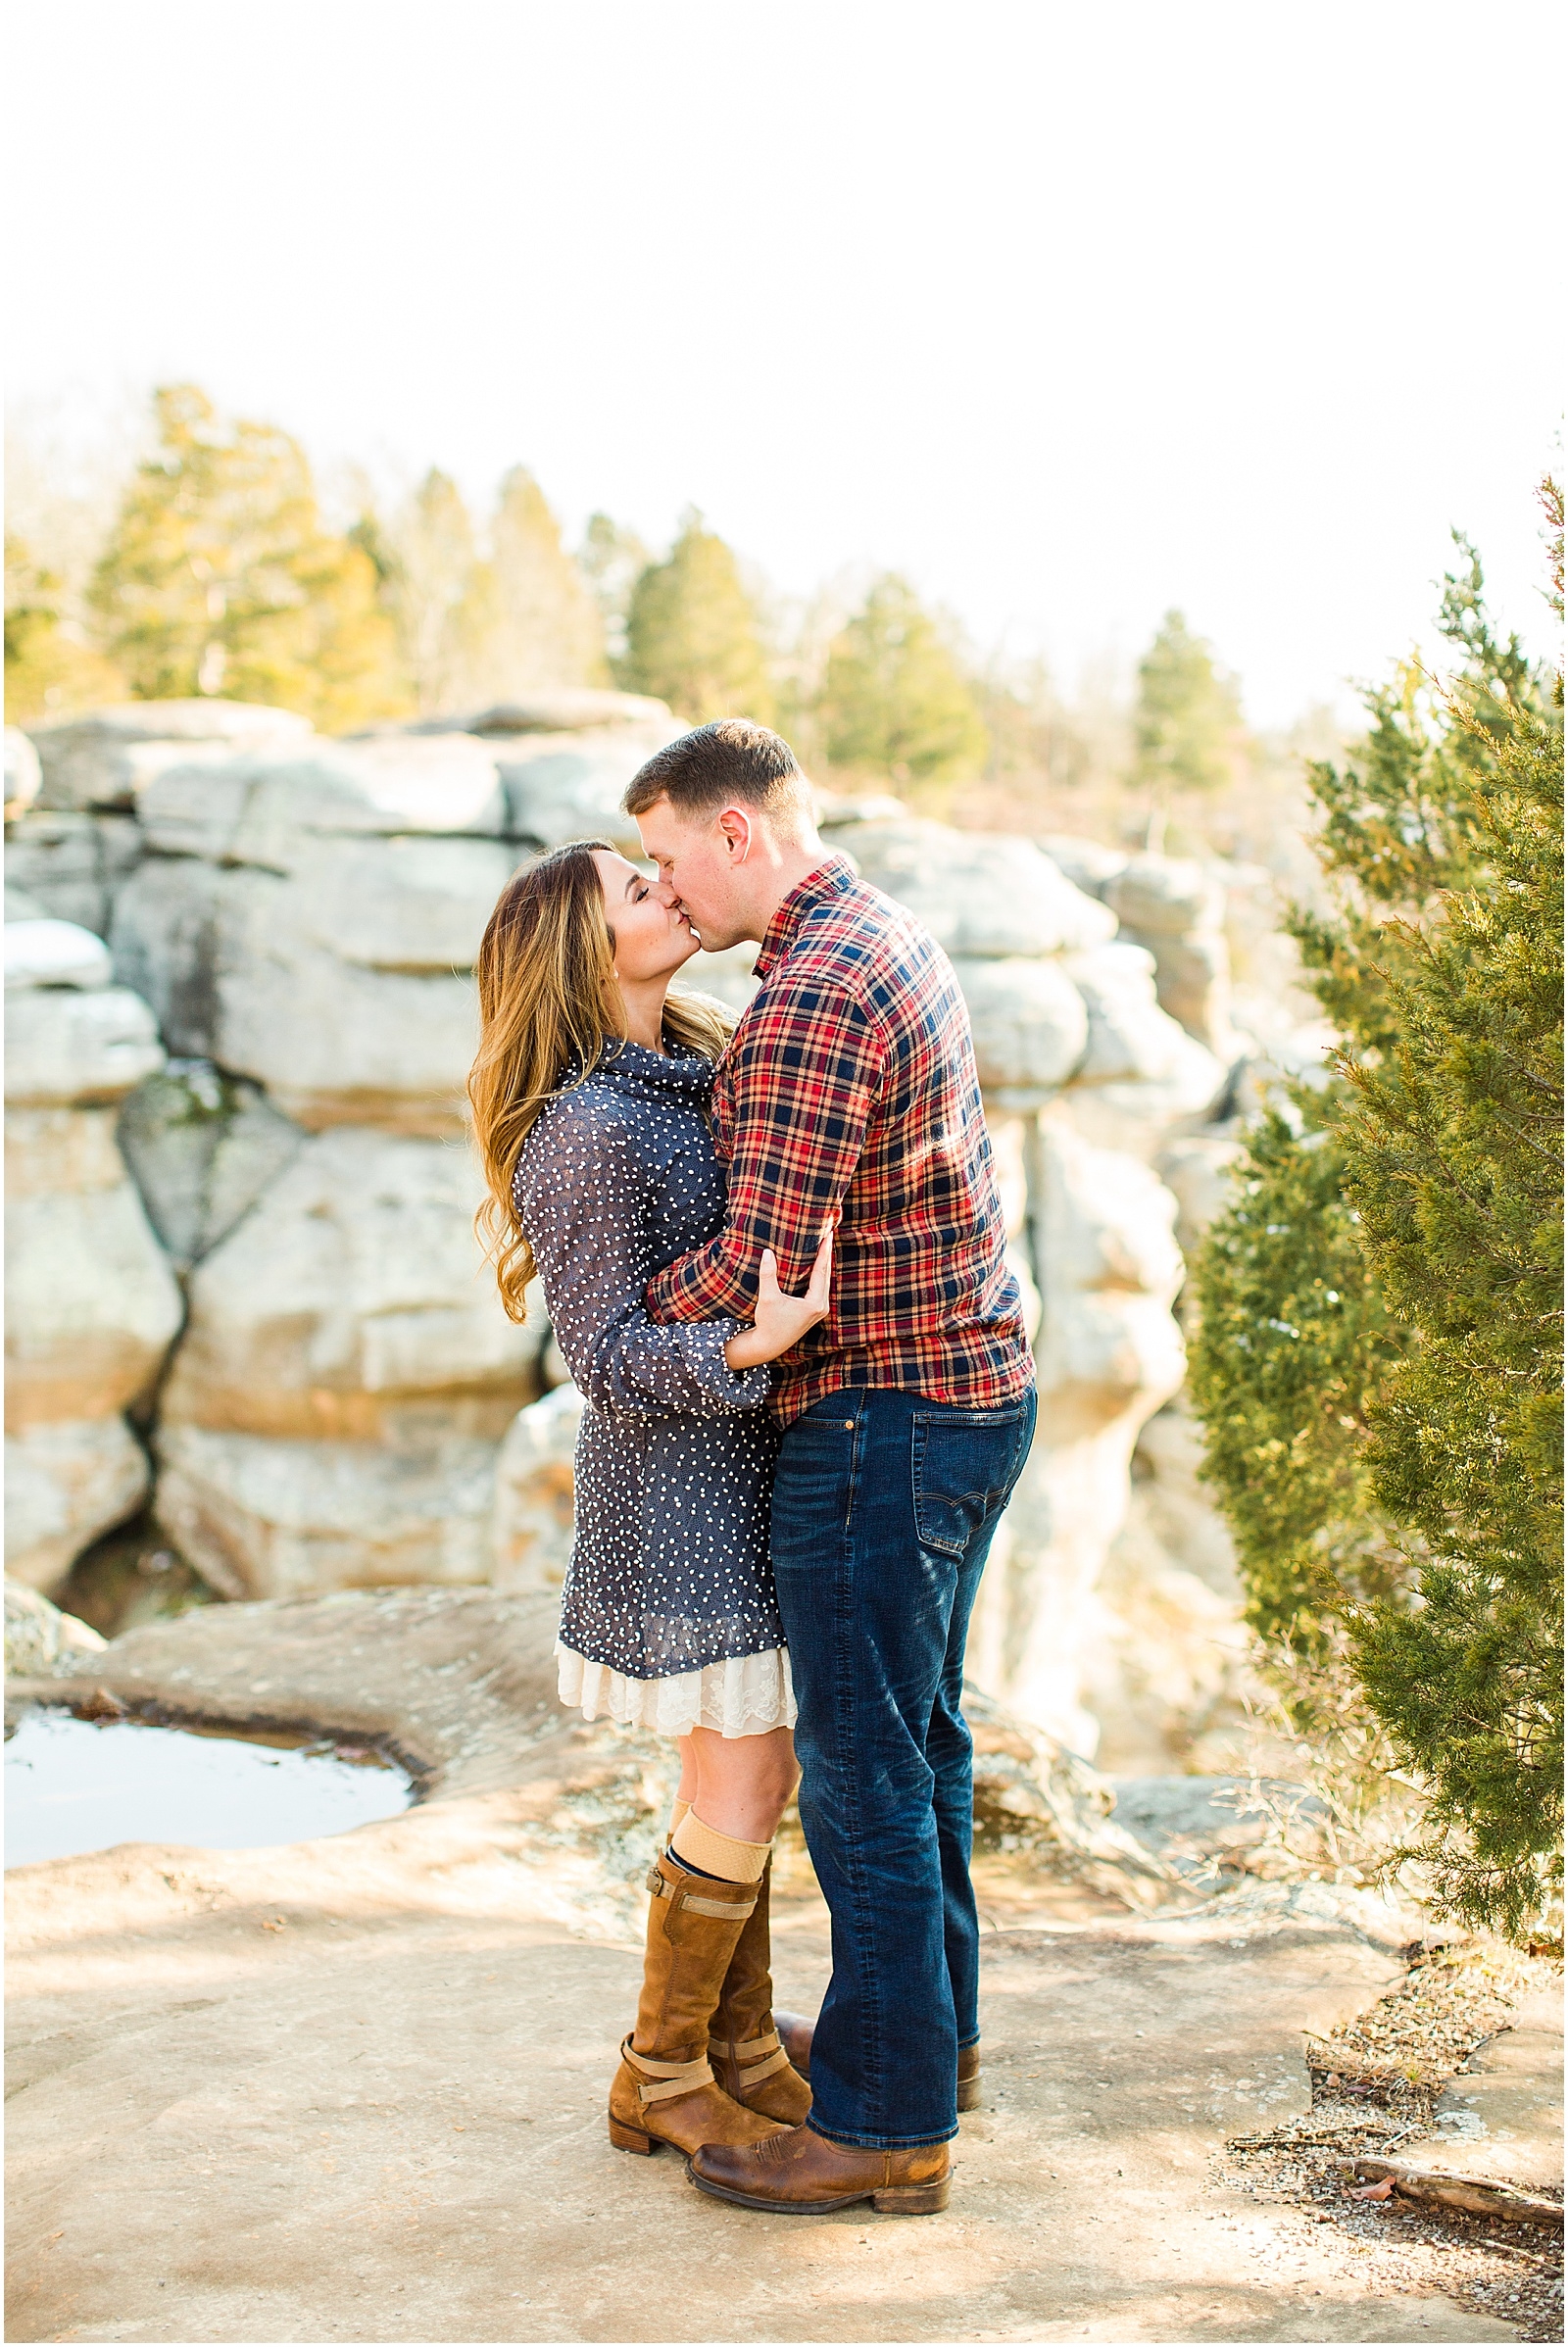 A Sunny Garden of the Gods Engagement Session | Shiloh and Lee | Bret and Brandie Photography014.jpg